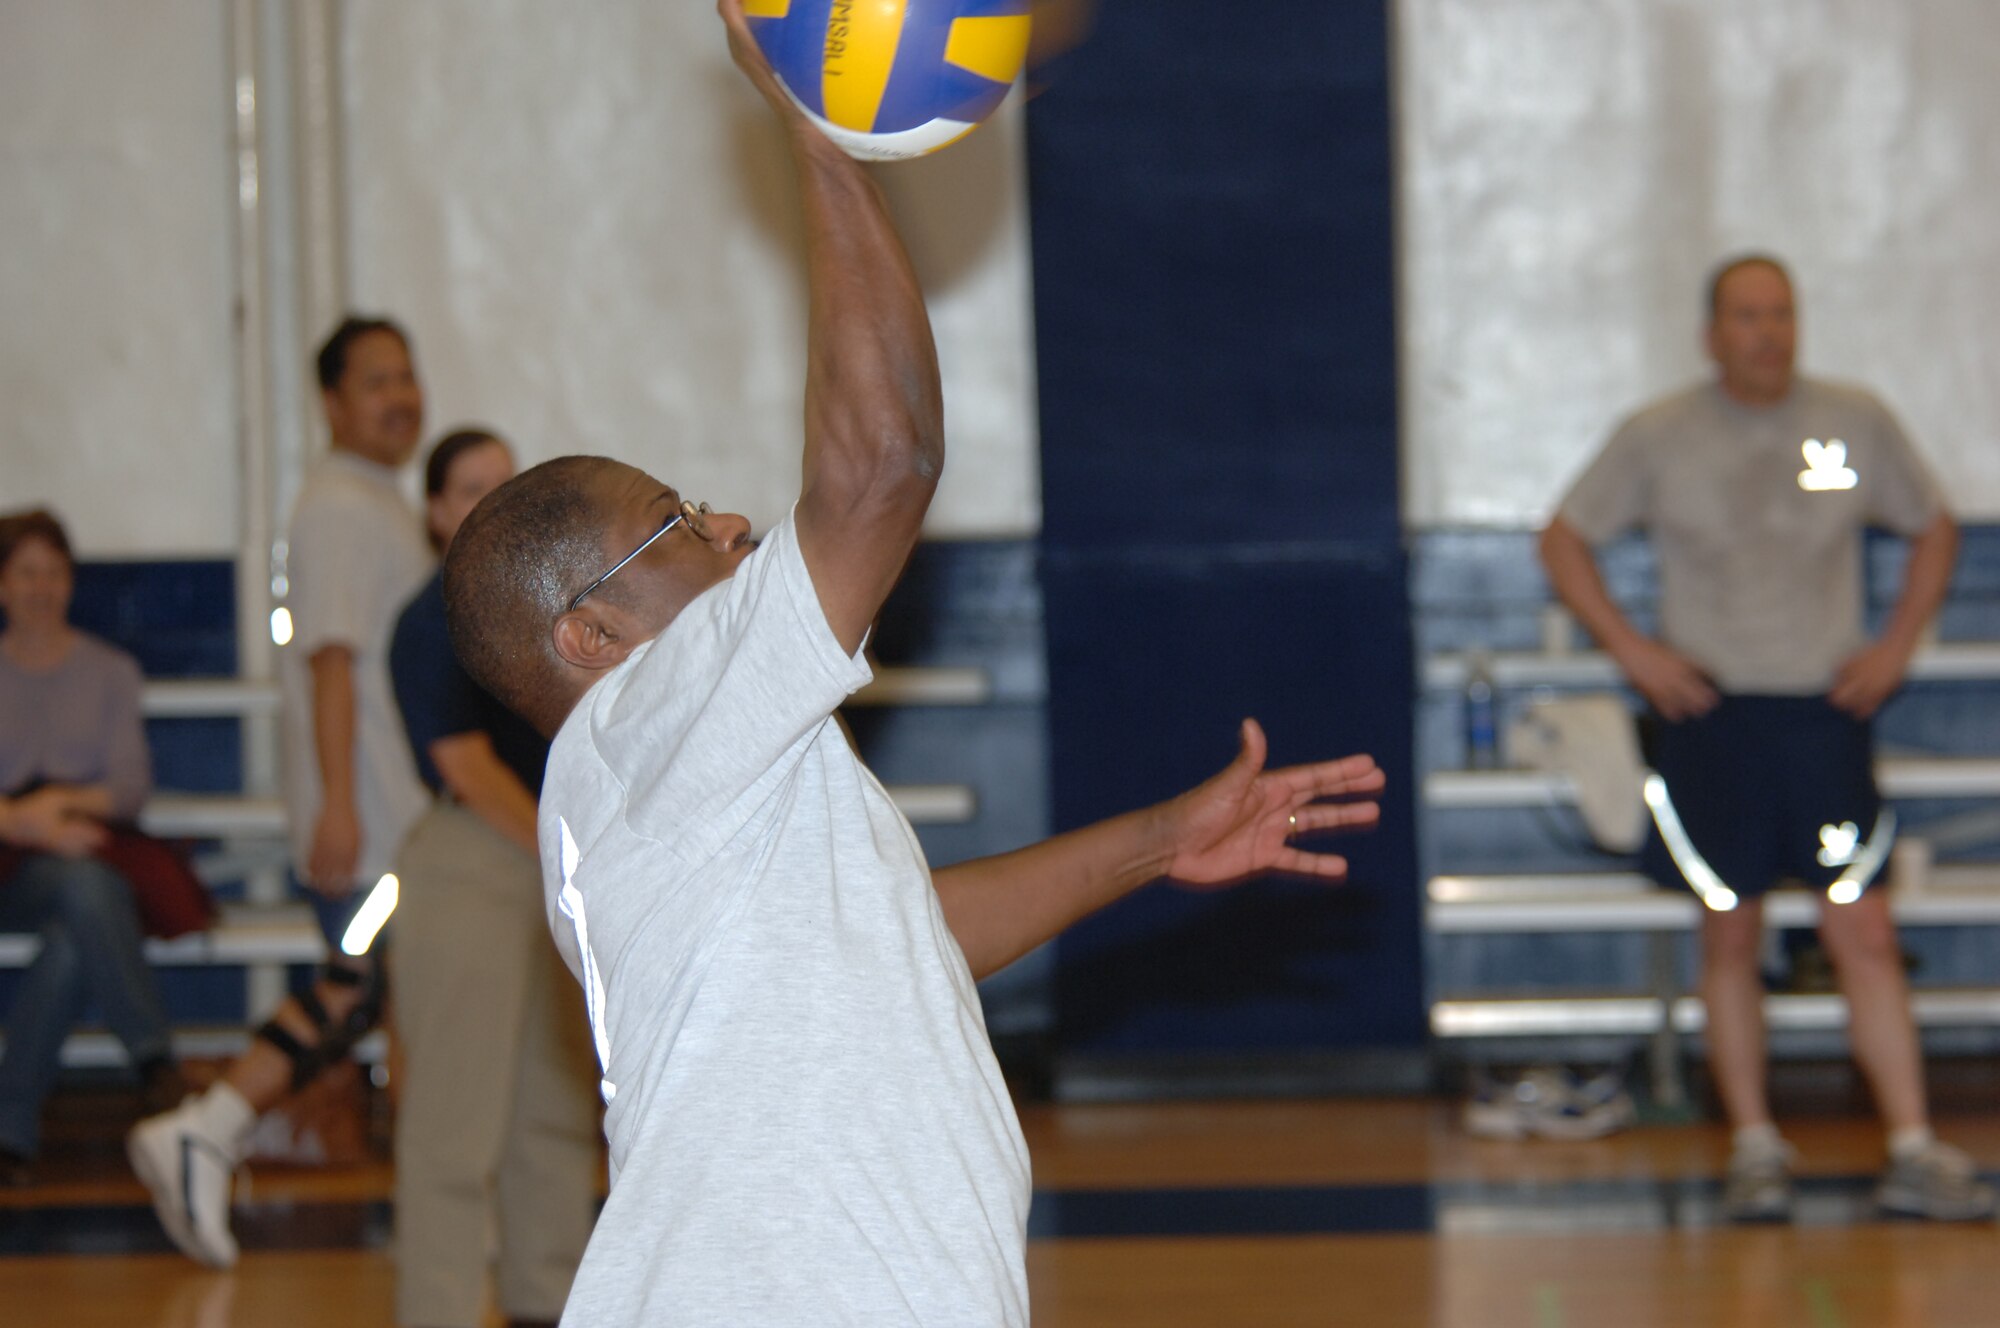 MISAWA AIR BASE, Japan -- Chief Master Sgt. James Moore, with the 35th Communications Squadron, serves the ball during the Eagles vs. Chiefs volleyball game at the Potter Fitness Center, March 14, 2008.  The Eagles scored the first point in the game but the Chief's ended the competition with victory.  (U.S. Air Force photo by Senior Airman Robert Barnett)